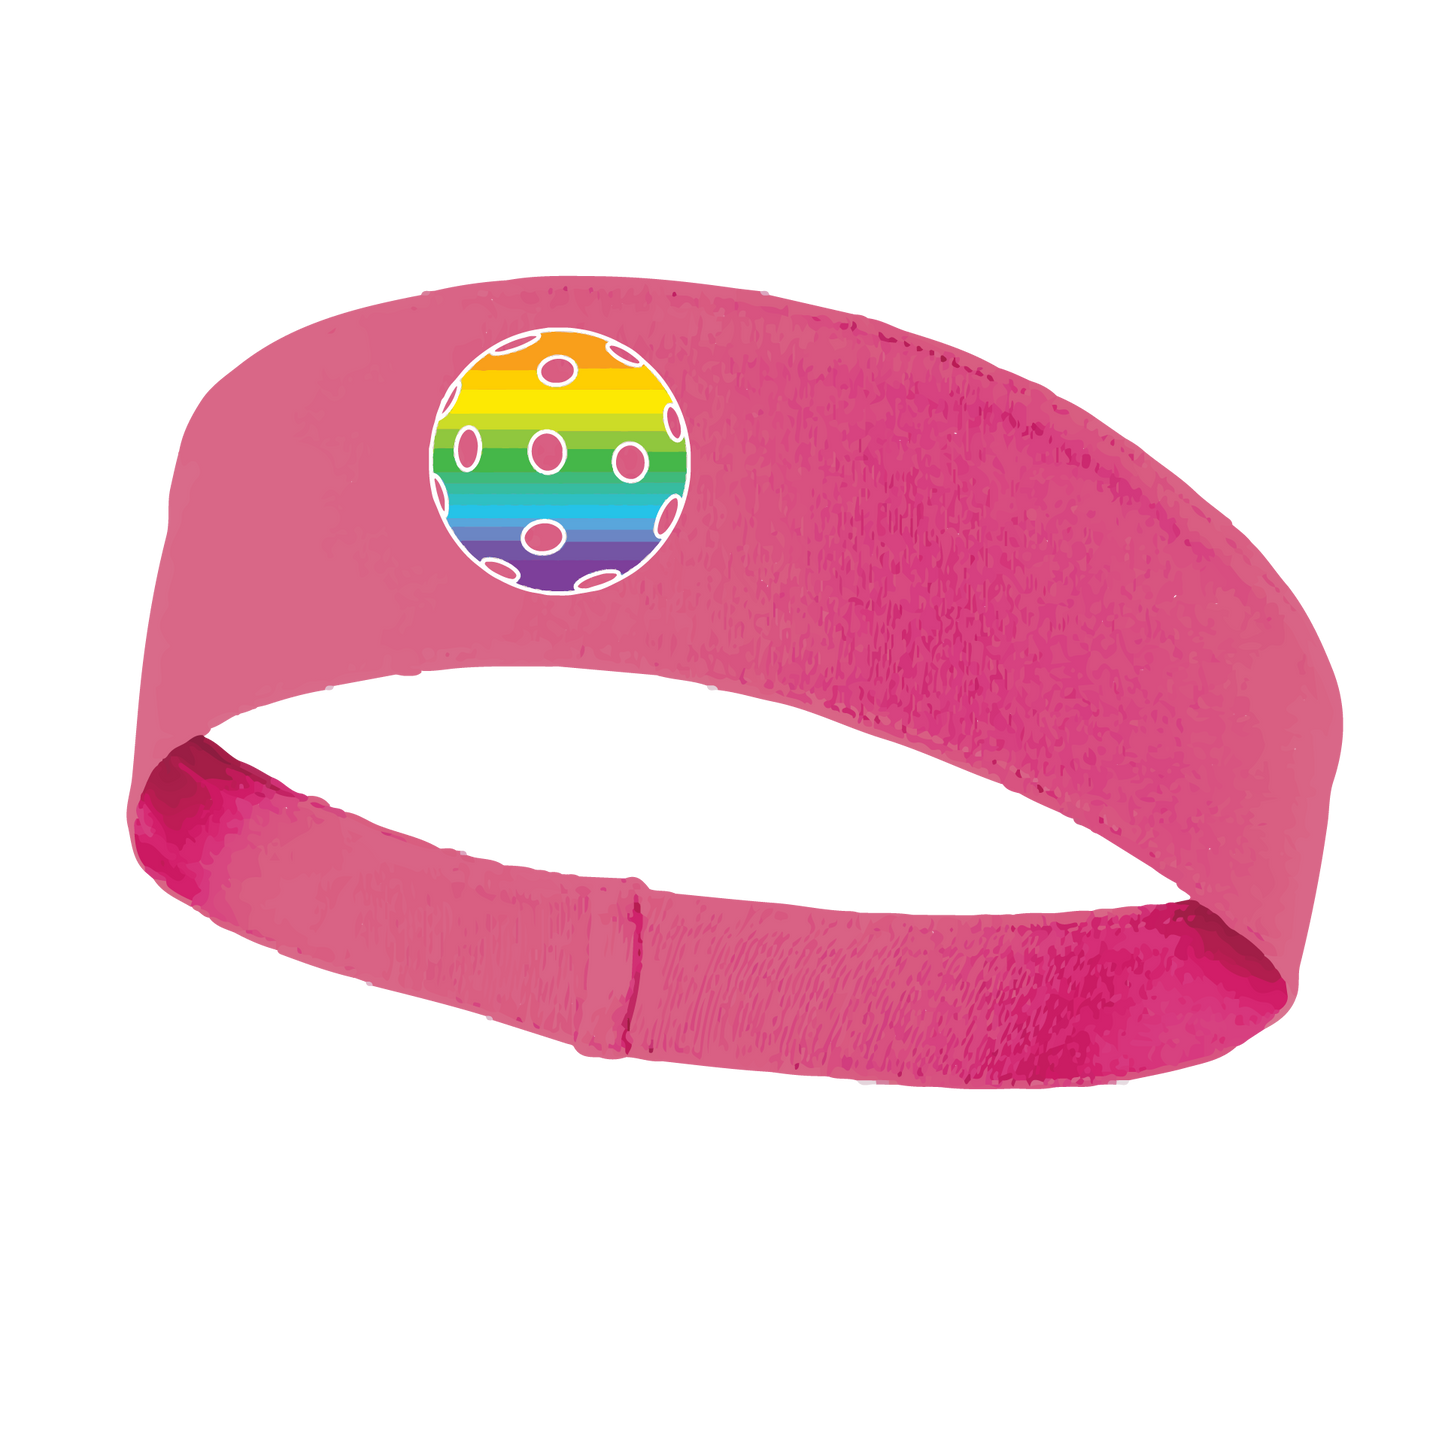 Pickleball Headband Design: Customizable Pickleball color on headband  This fun, pickleball designed, moisture-wicking headband narrows in the back to fit more securely. Single-needle top-stitched edging. These headbands come in a variety of colors. Truly shows your love for the sport of pickleball!! 